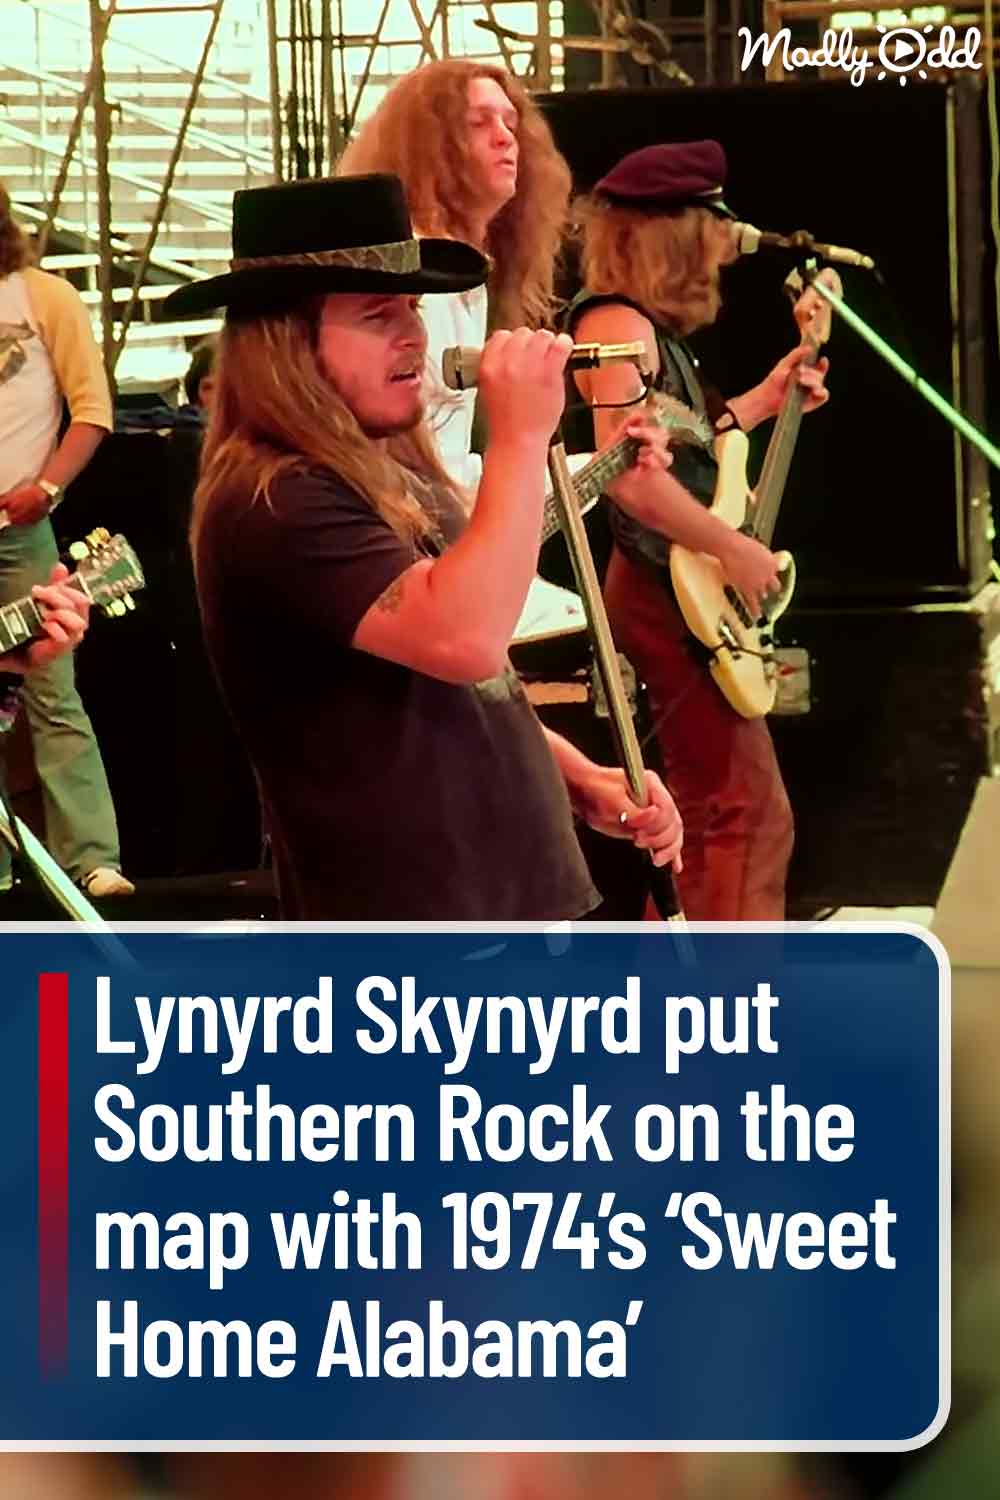 Lynyrd Skynyrd put Southern Rock on the map with 1974’s ‘Sweet Home Alabama’